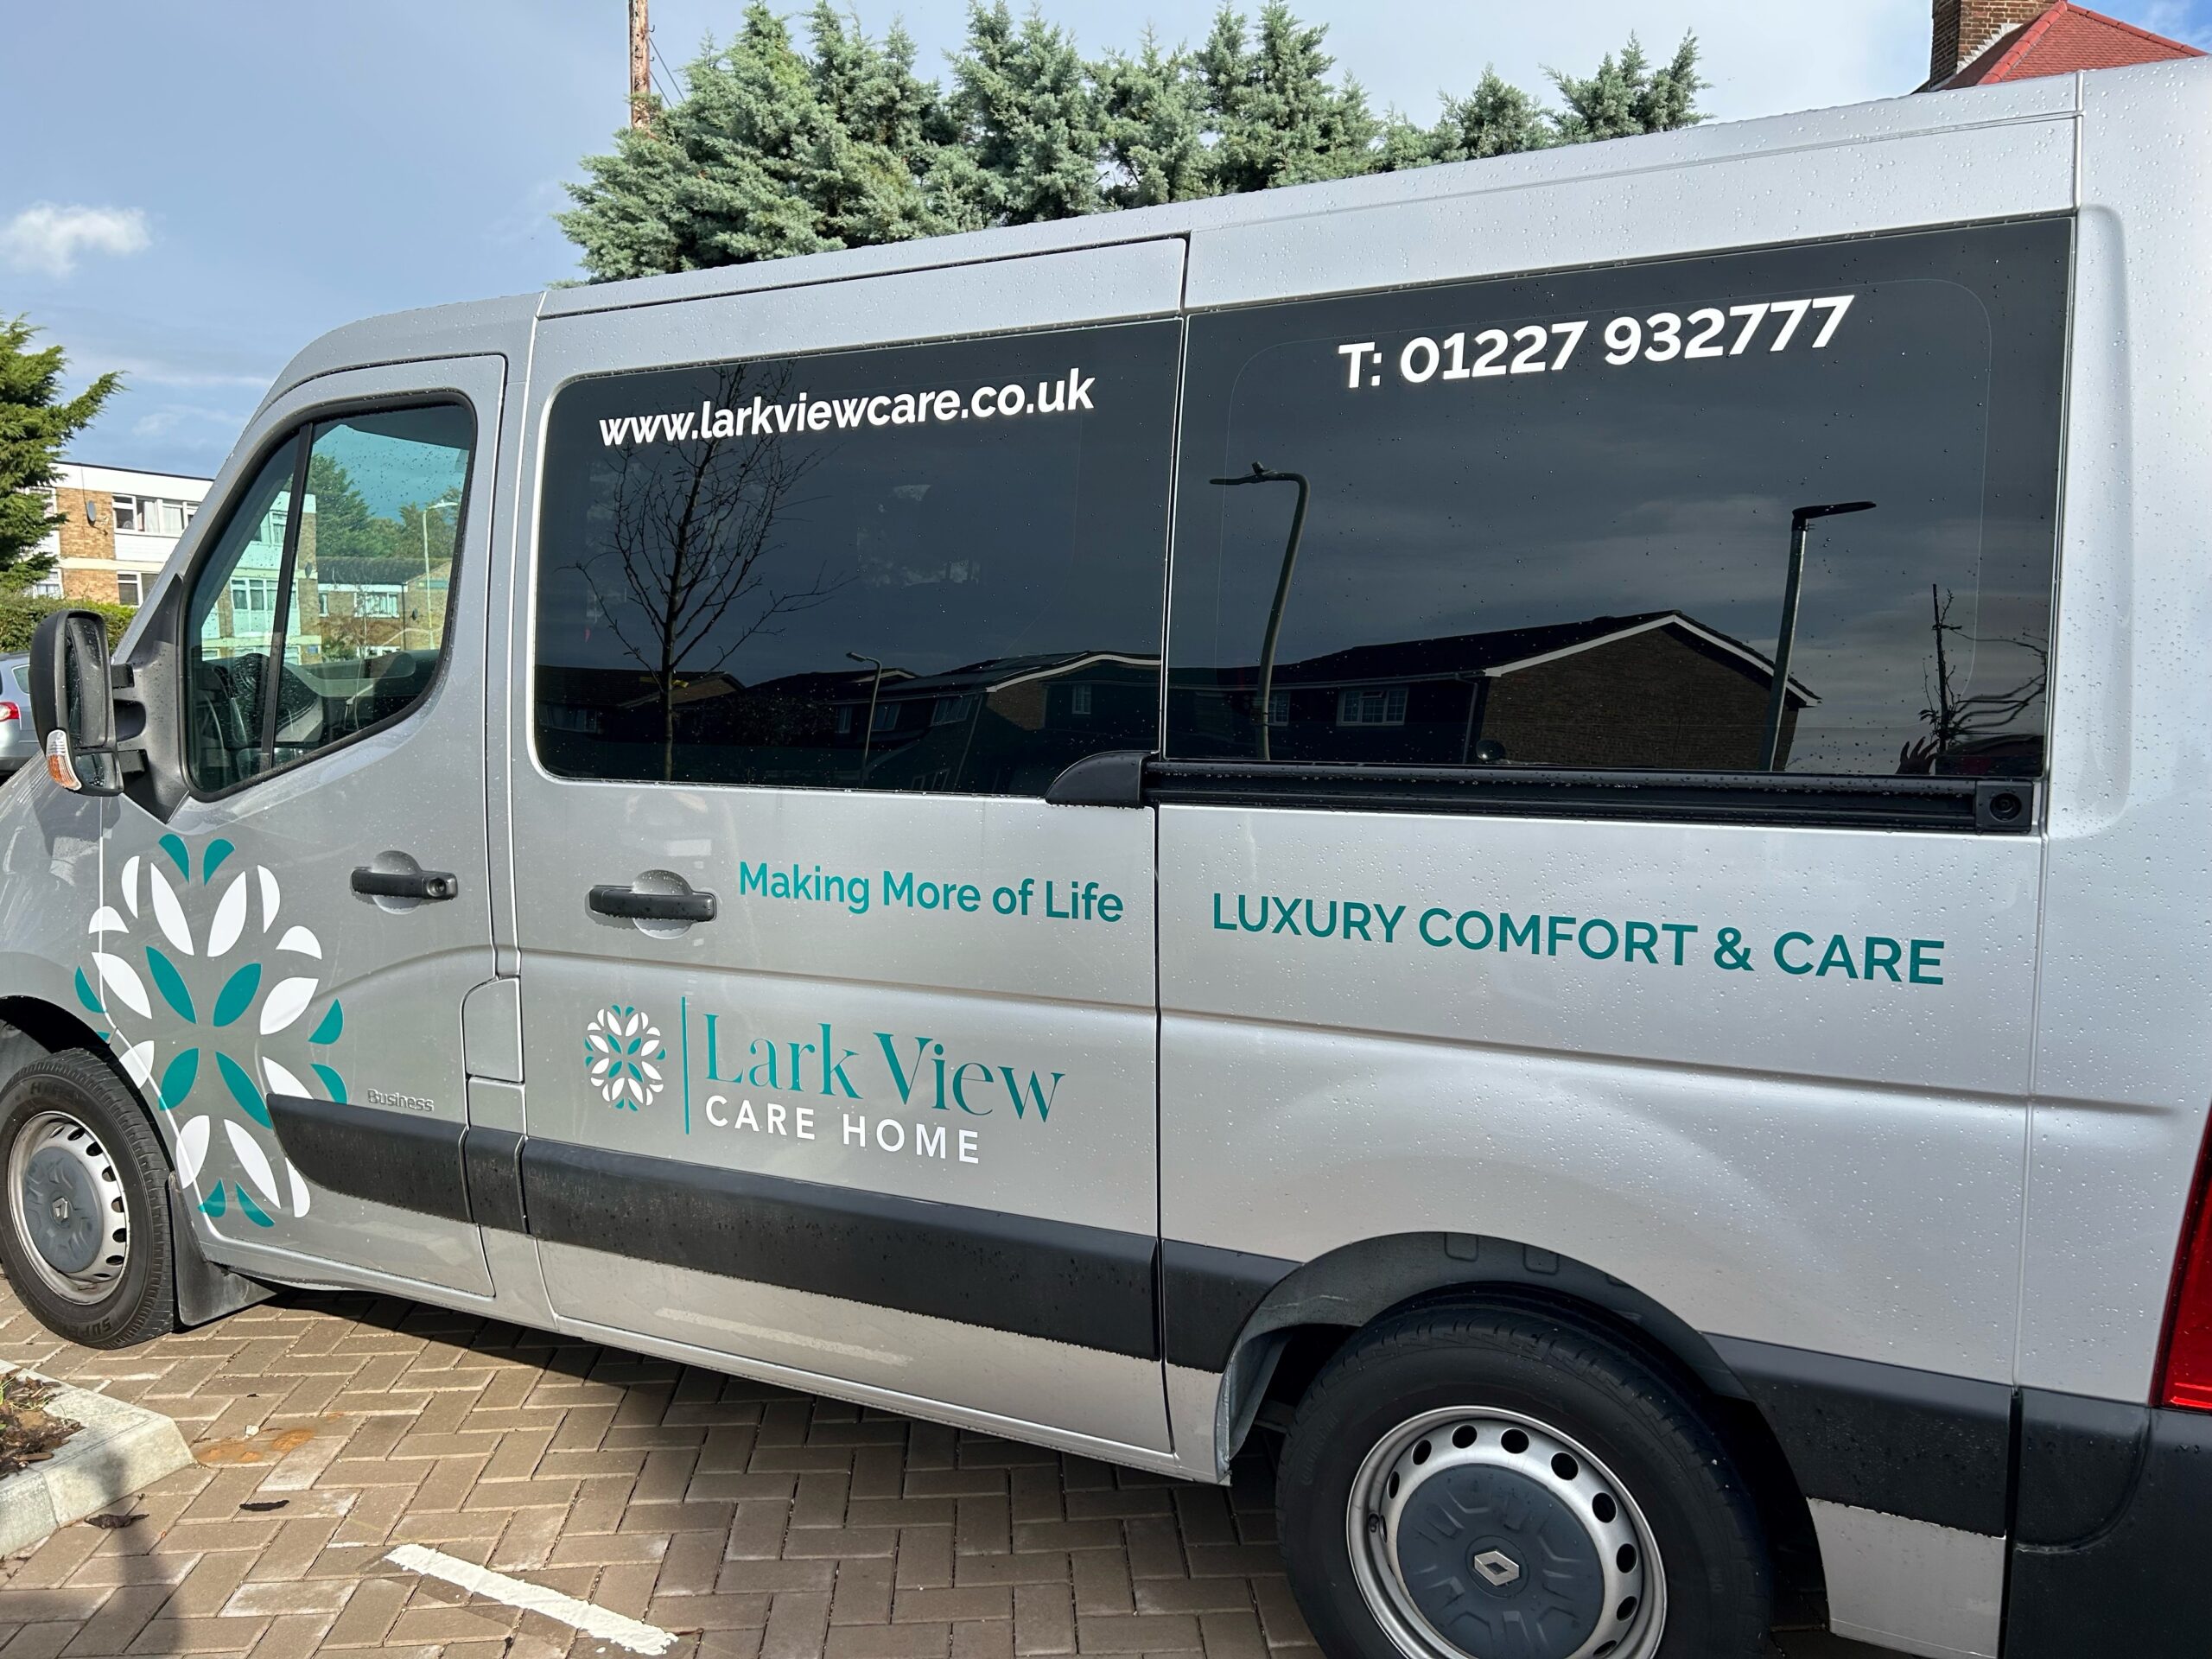 Side view of the Lark View minibus